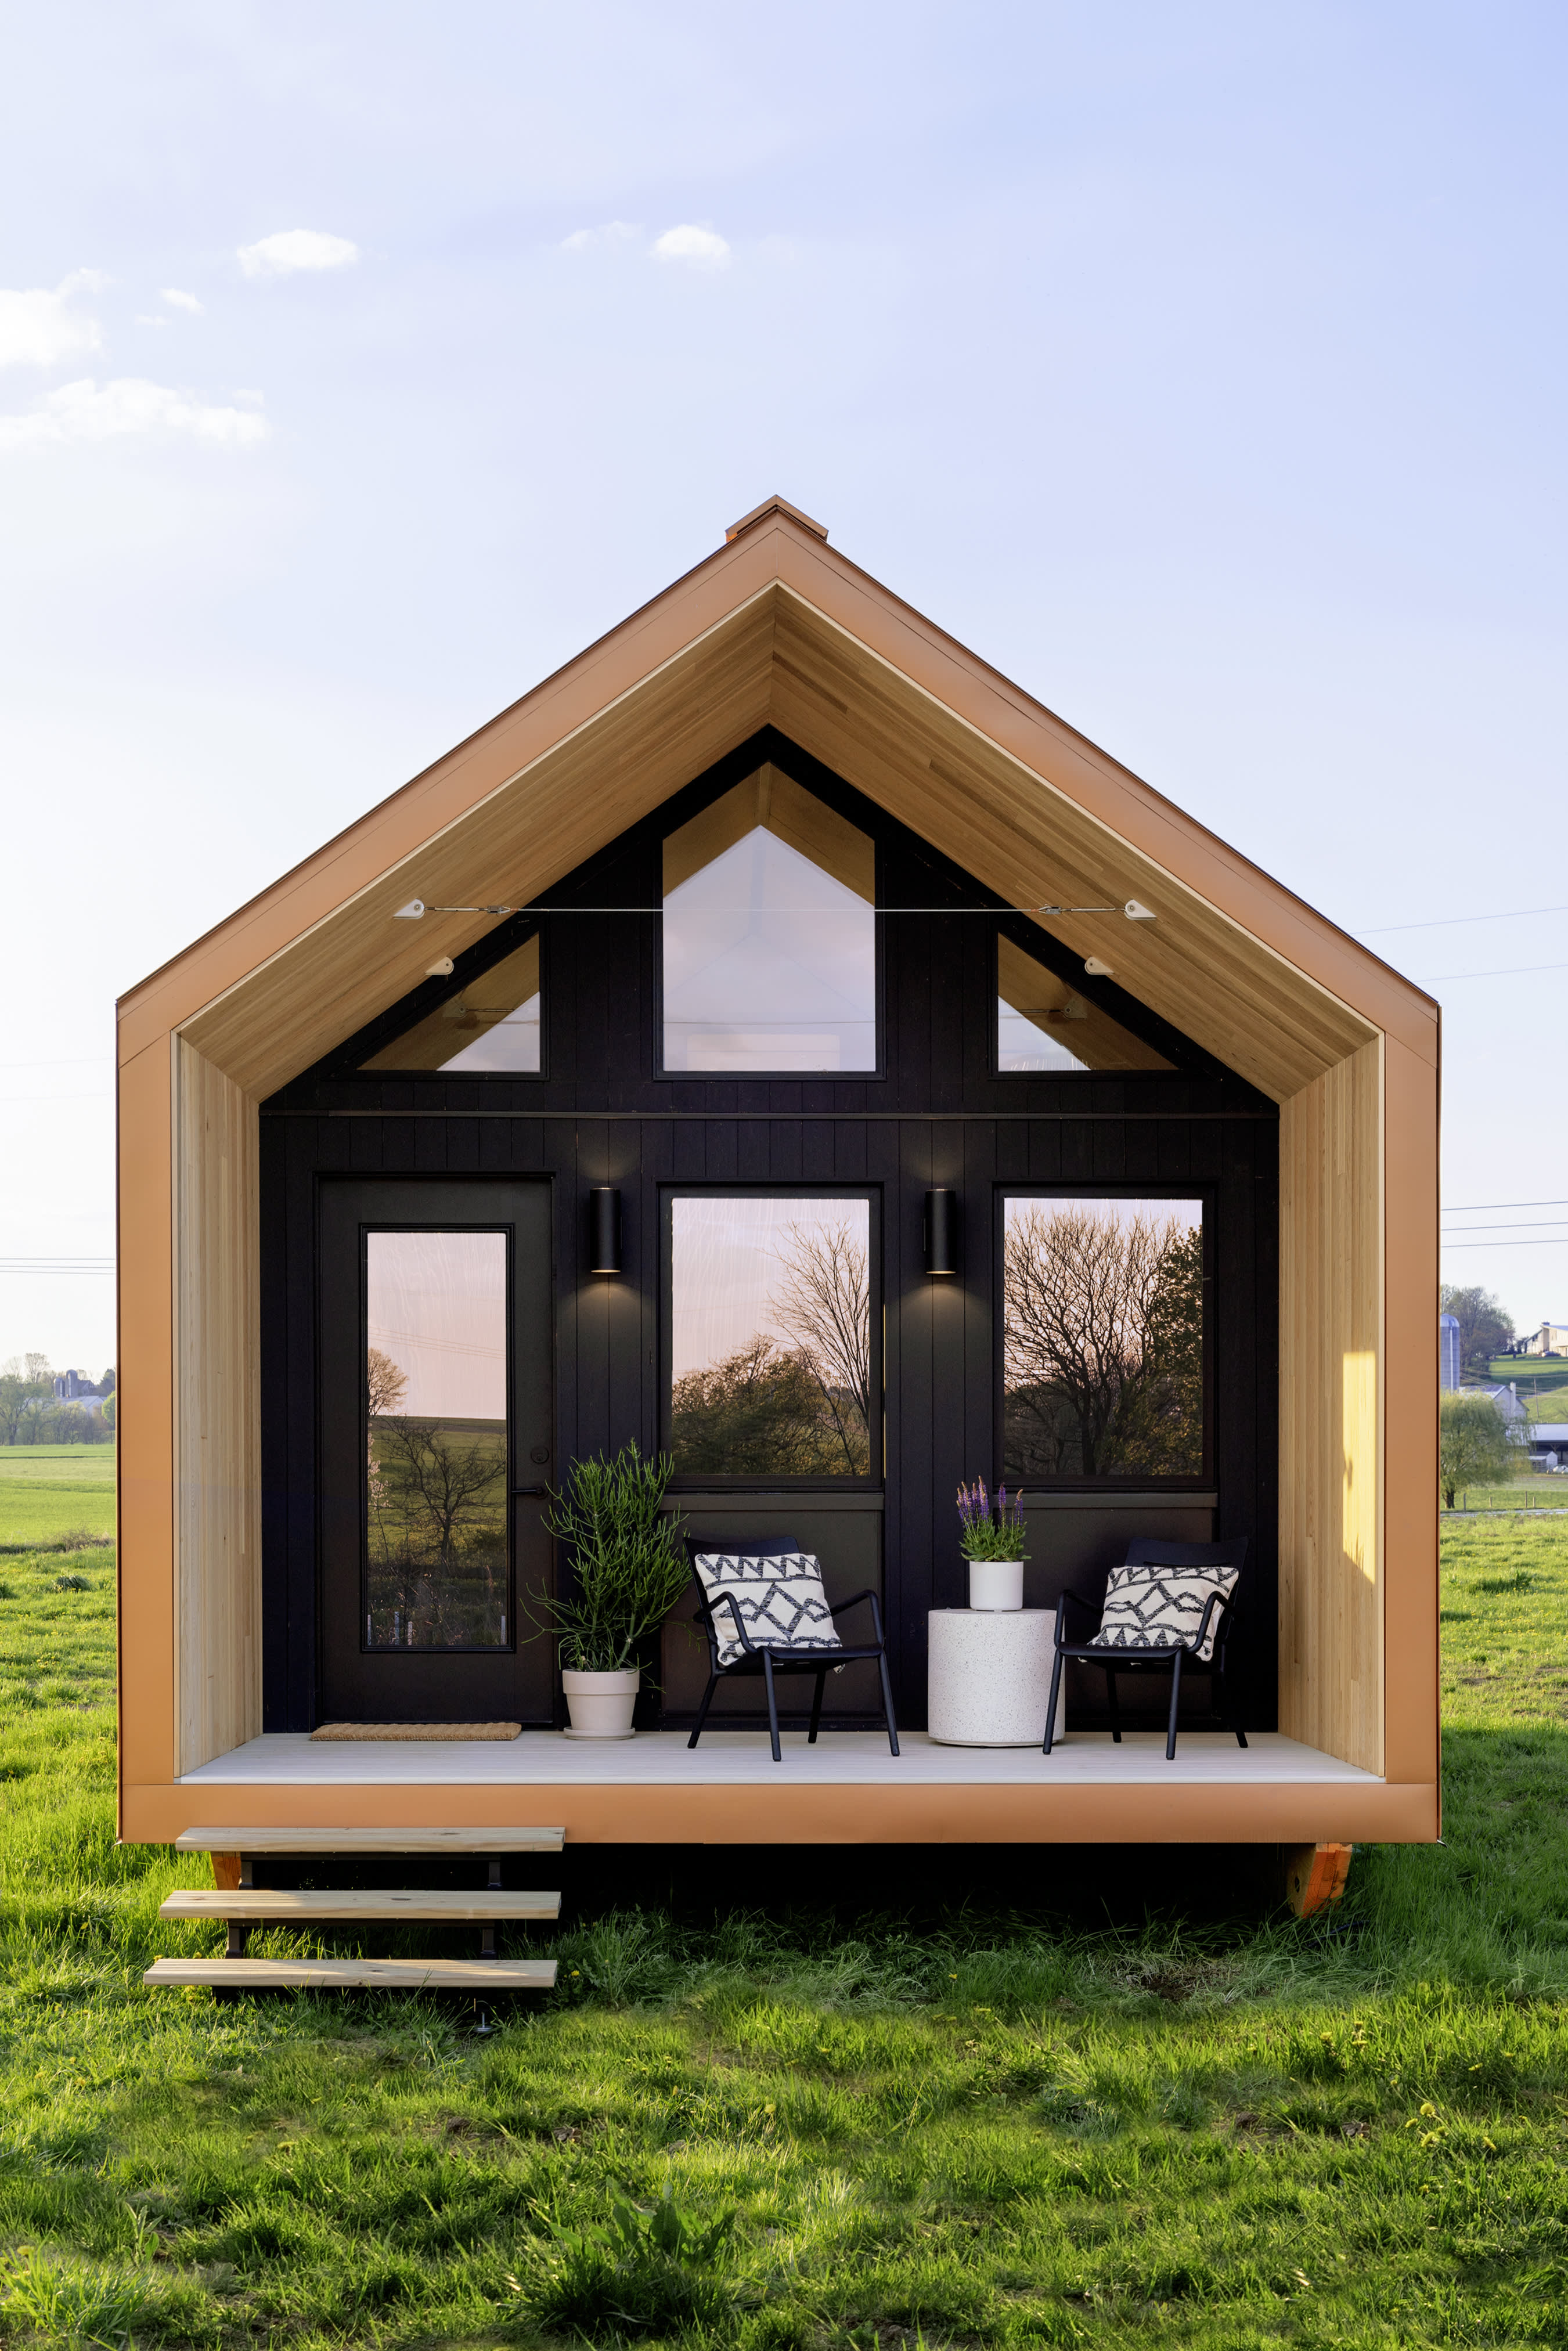 Local tiny house builder looks to connect with buyers directly